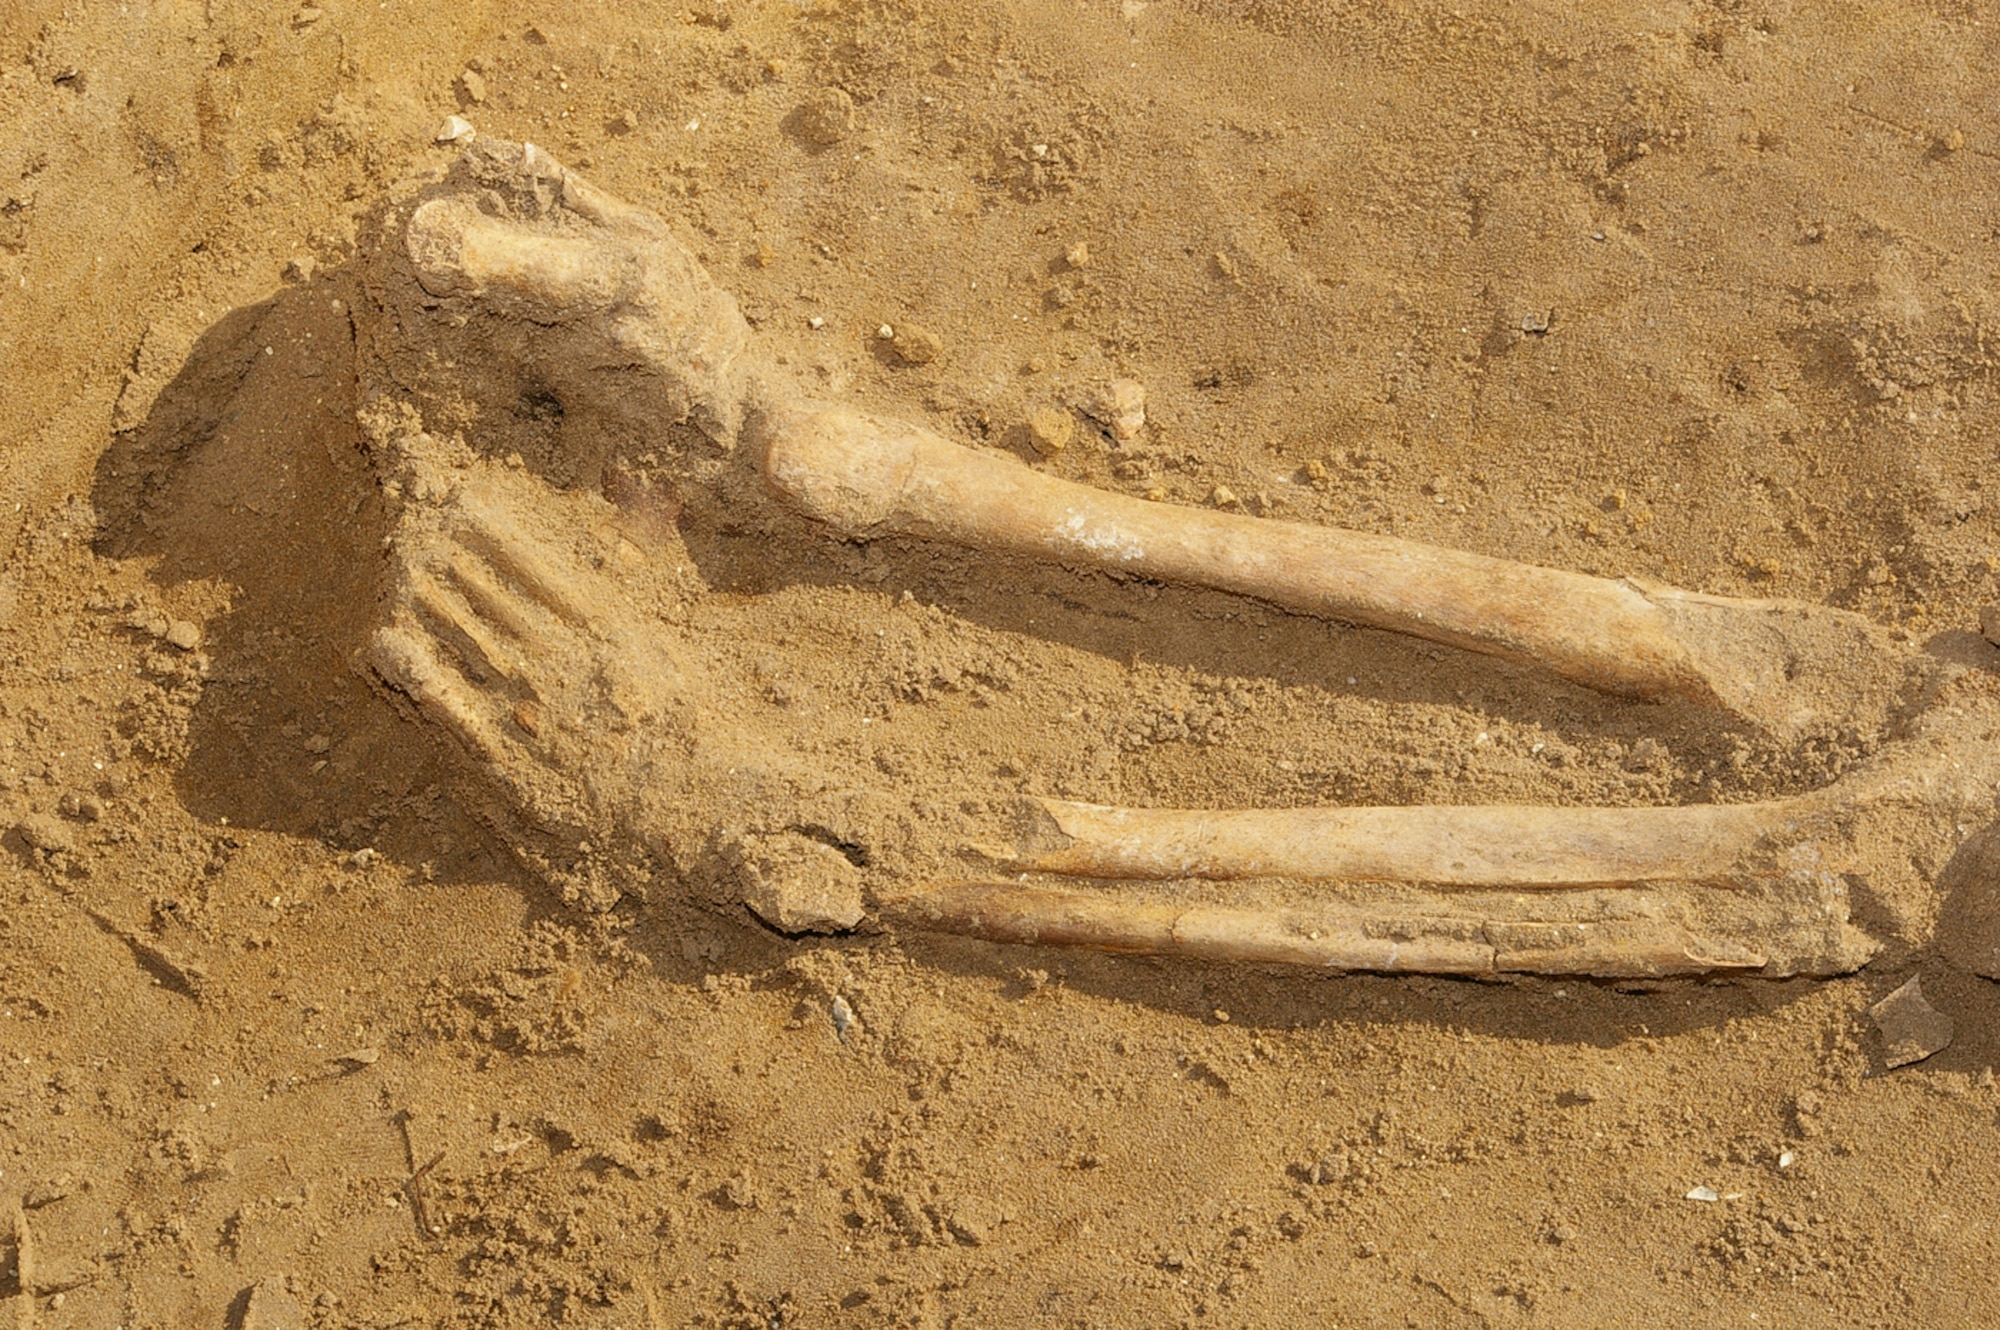 Human remains, thought to be between 1,900 and 2,000 years old, were found at the RAF Mildenhall officers' housing area in Beck Row during an archeological dig by the Suffolk County Council archeological service. The remains were discovered March 12, and finally uncovered March 14. The skeleton has now been removed from the area and will be studied by archeology specialists. (Air Force photo by Karen Abeyasekere)